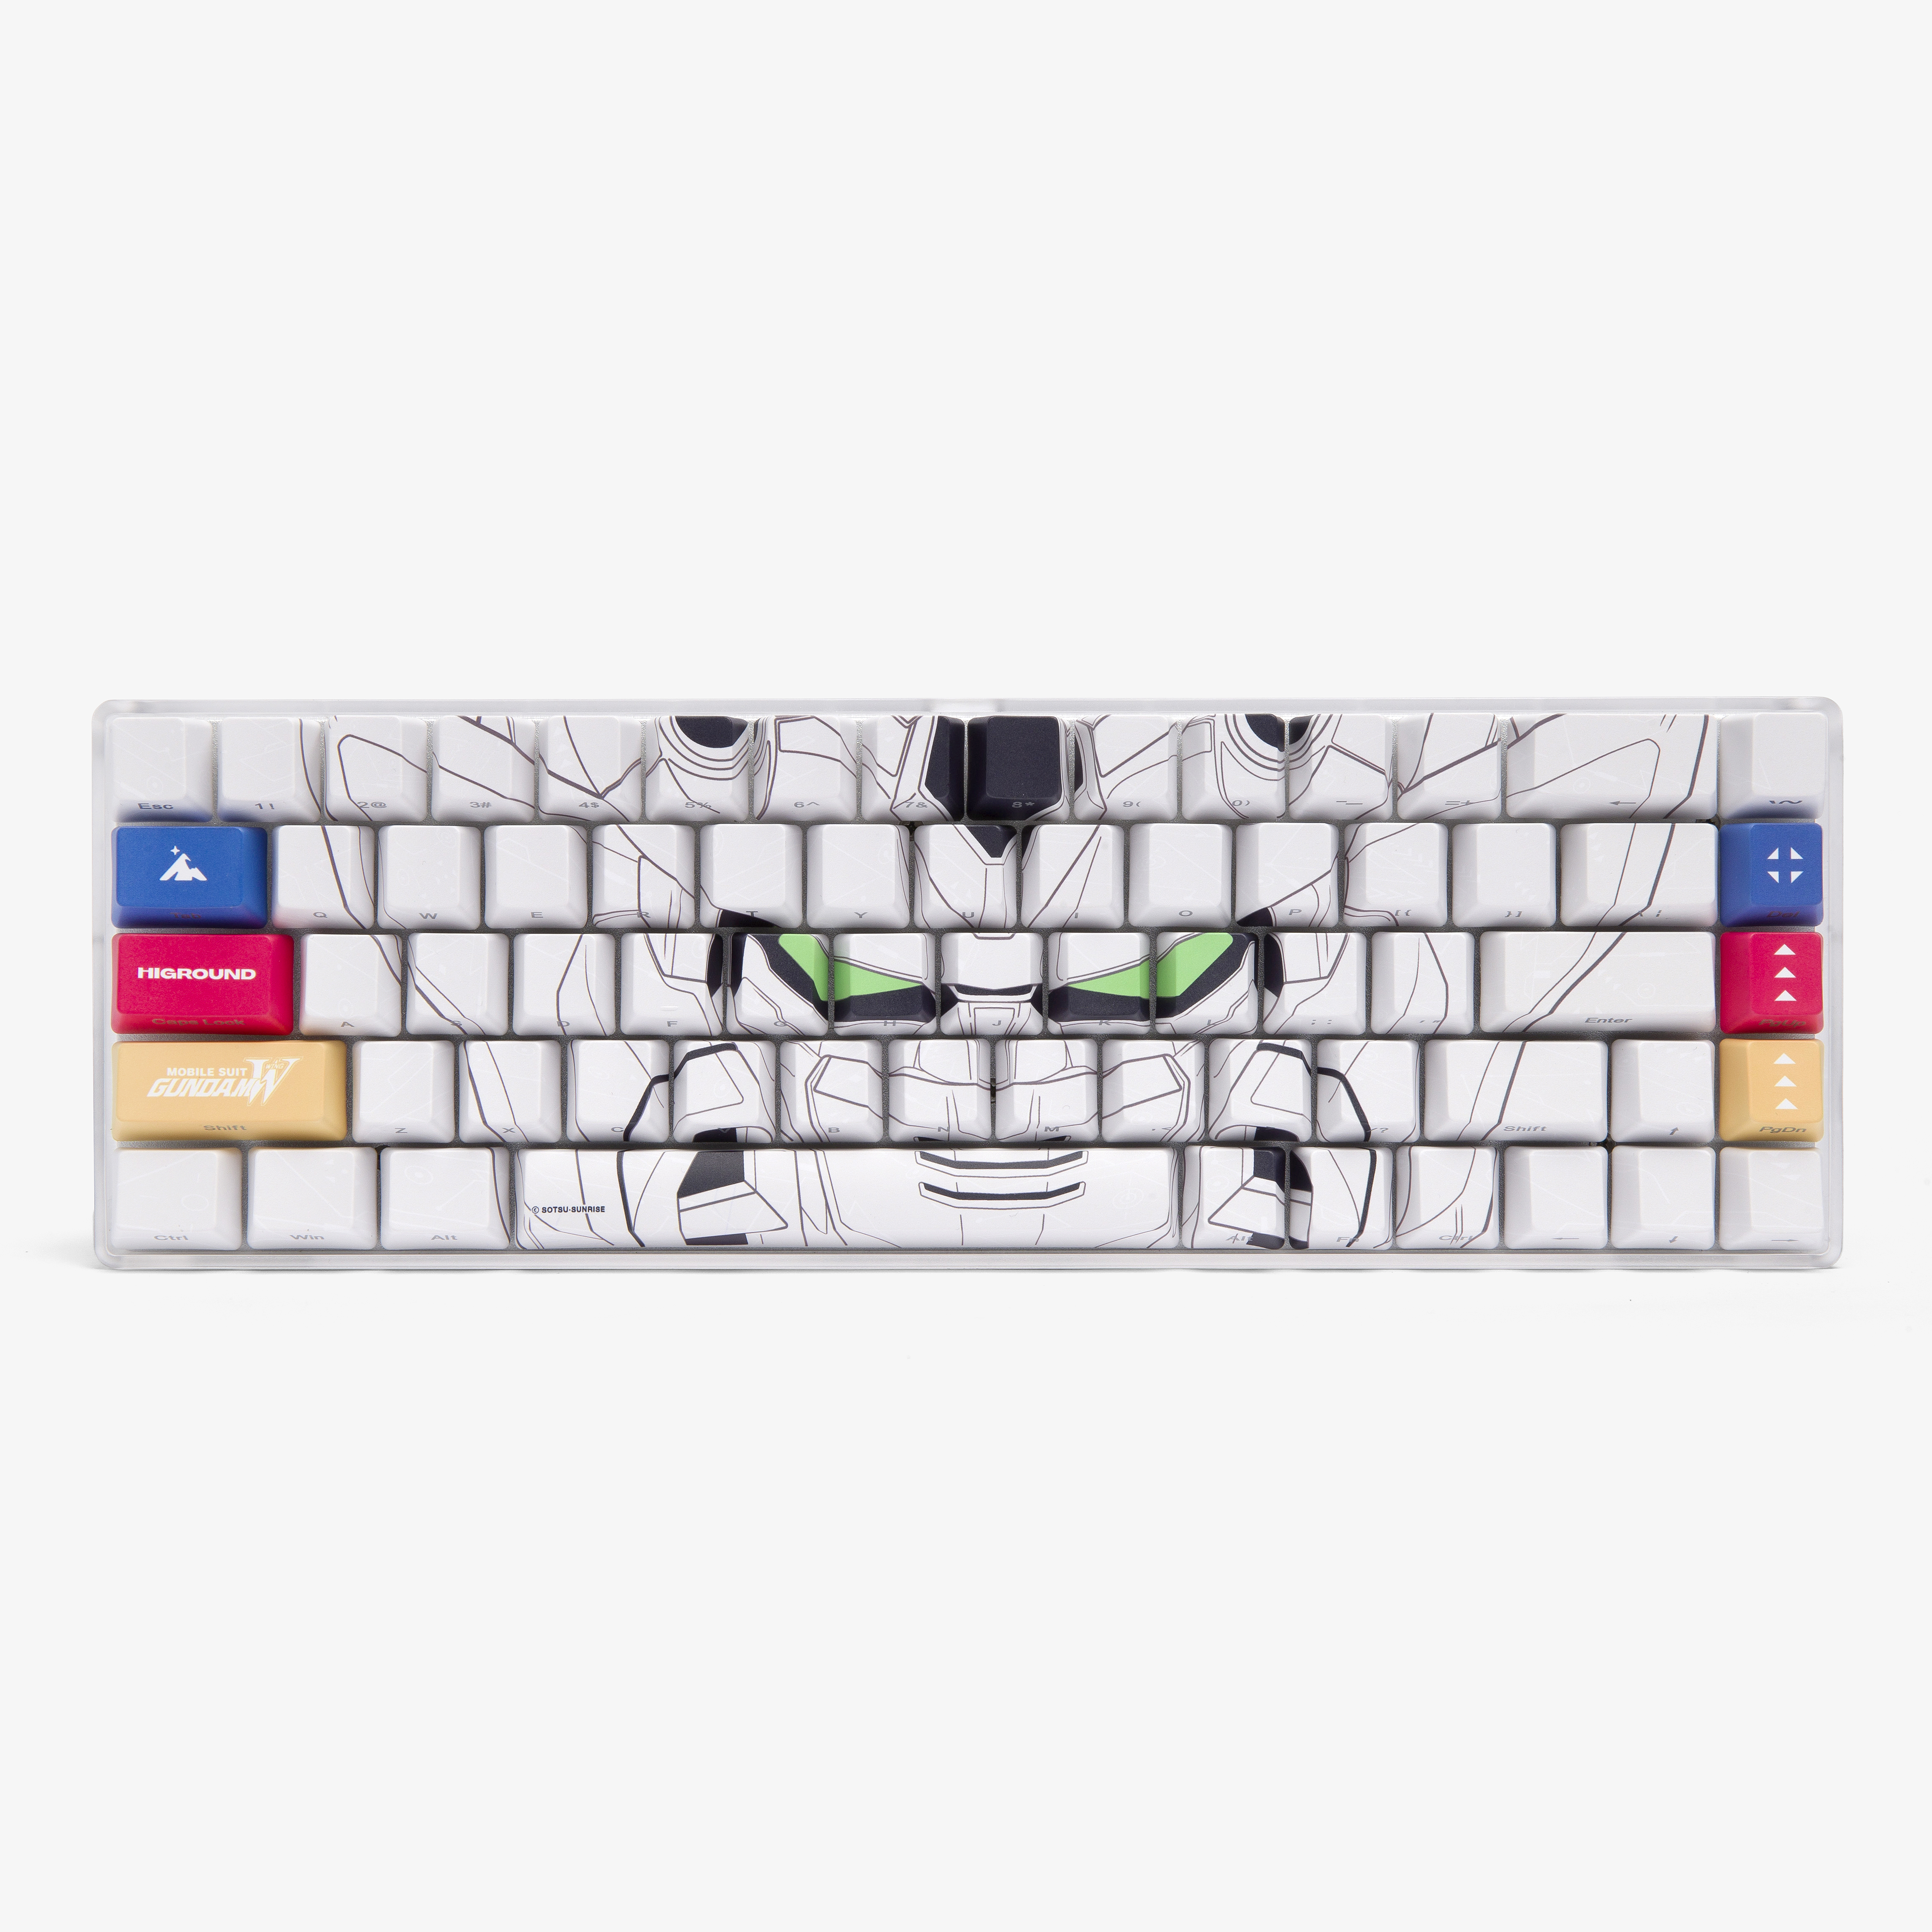 top view of gundam face keycap set in white